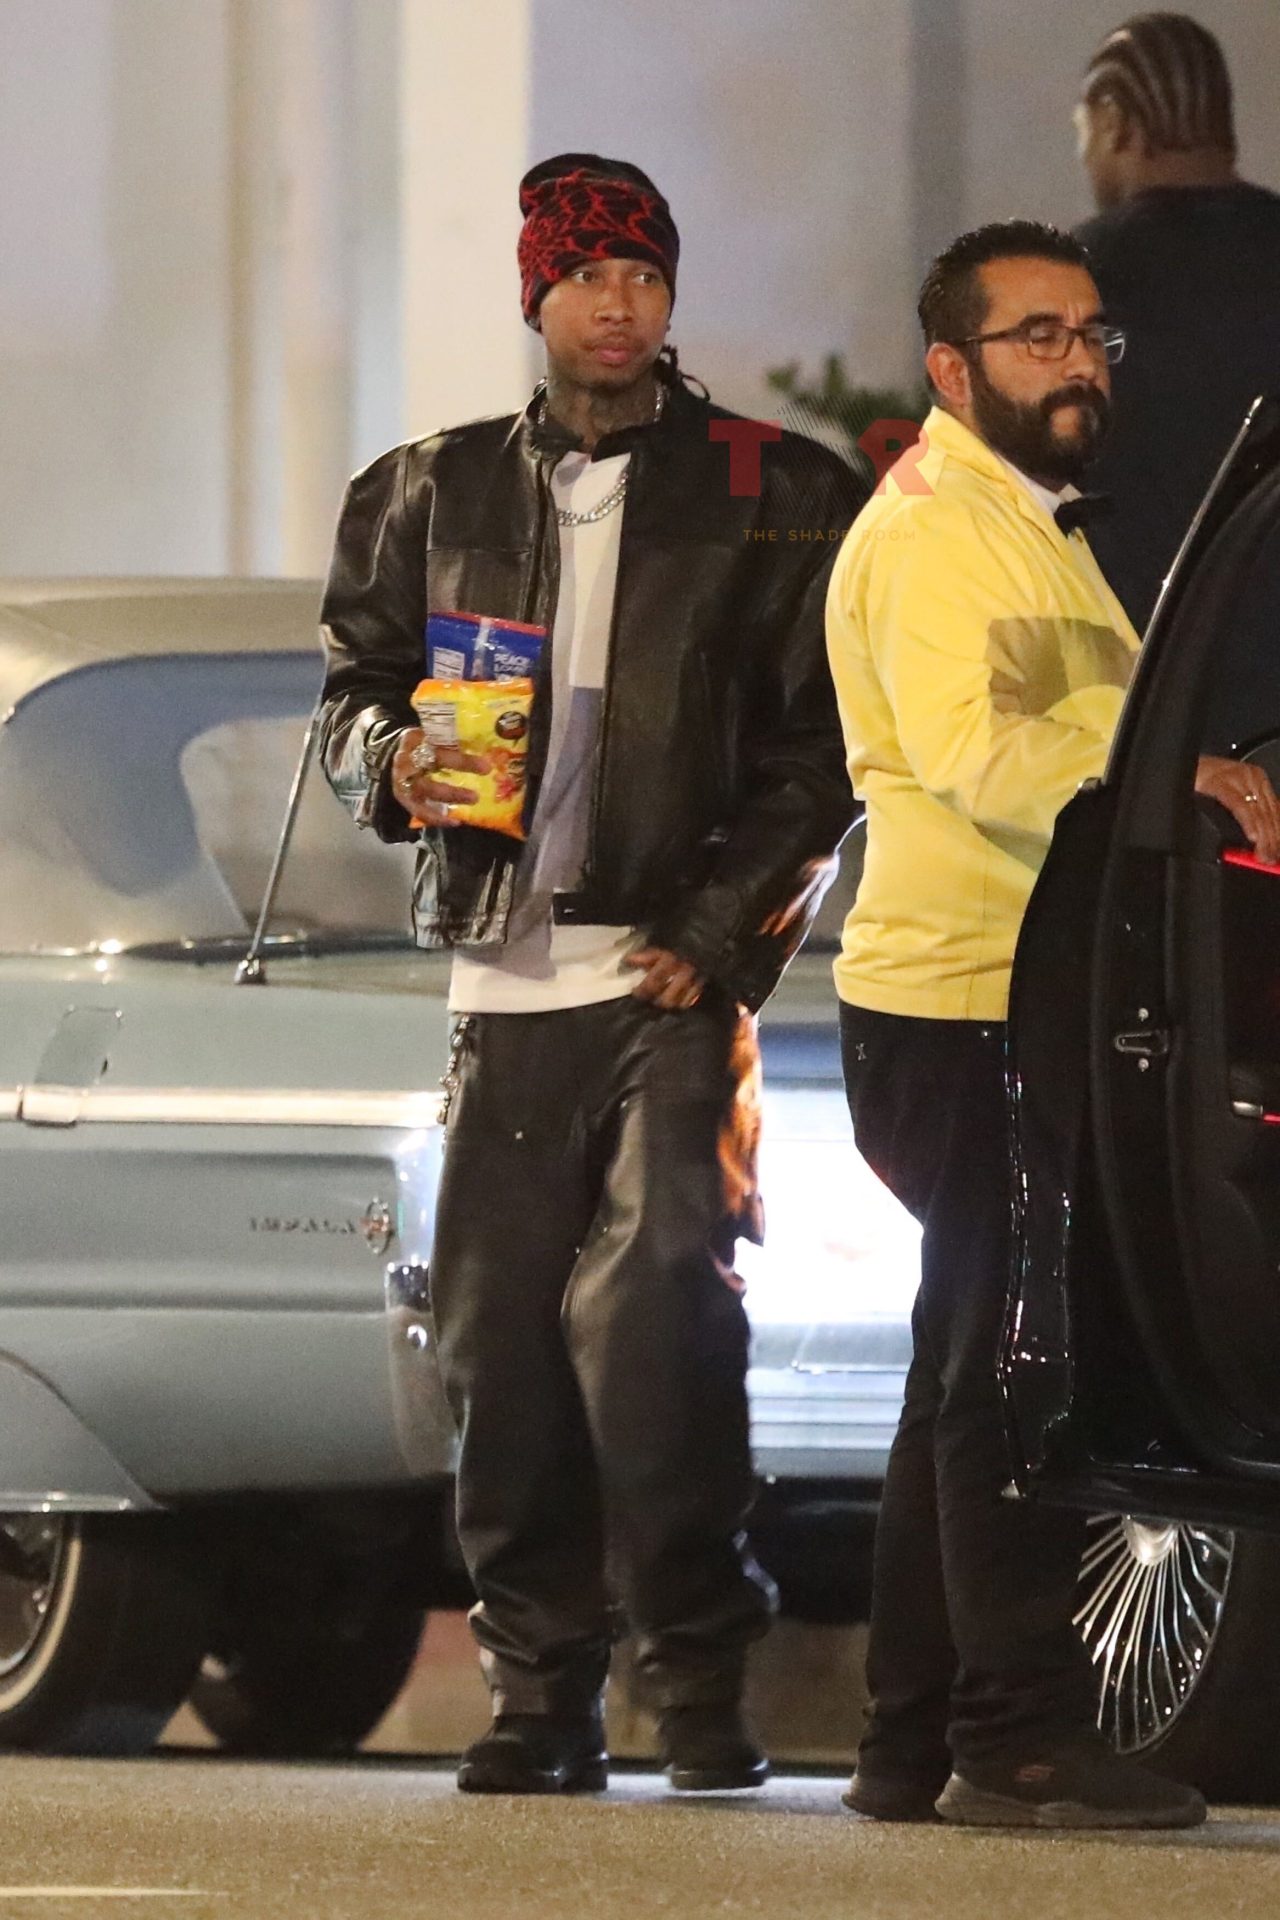 Where Y'all Going!? Tyga & Chloe Bailey Spotted Together (PHOTOS)